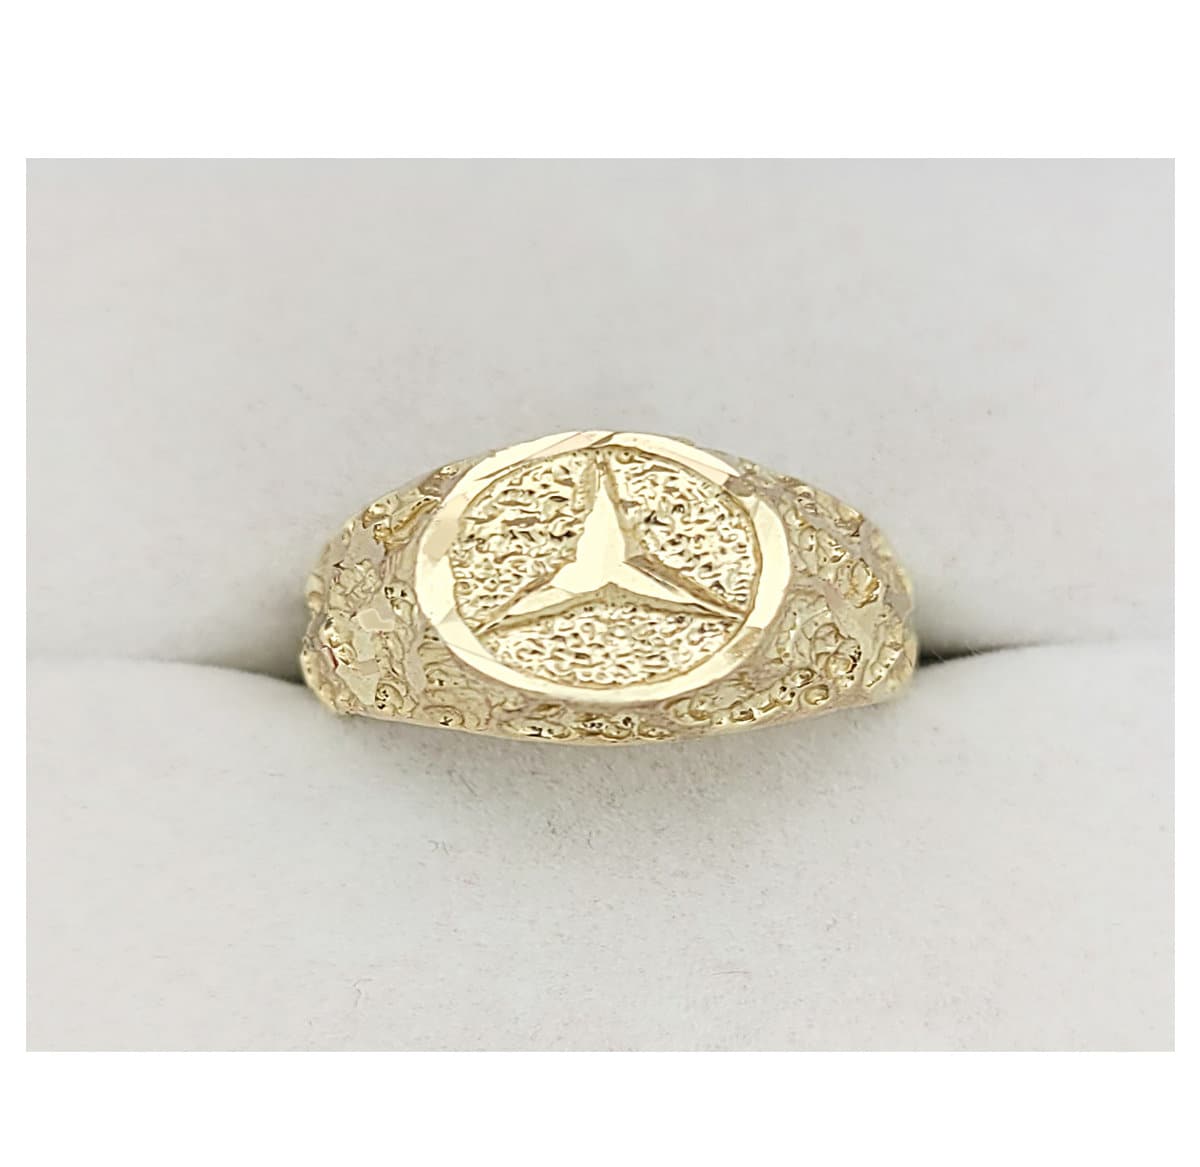 Buy DMJ Premium Heavy Square Shape Mercedes Gold Look Finely Detailed  Handmade Ring For Men Brass Gold Plated Ring (19) at Amazon.in